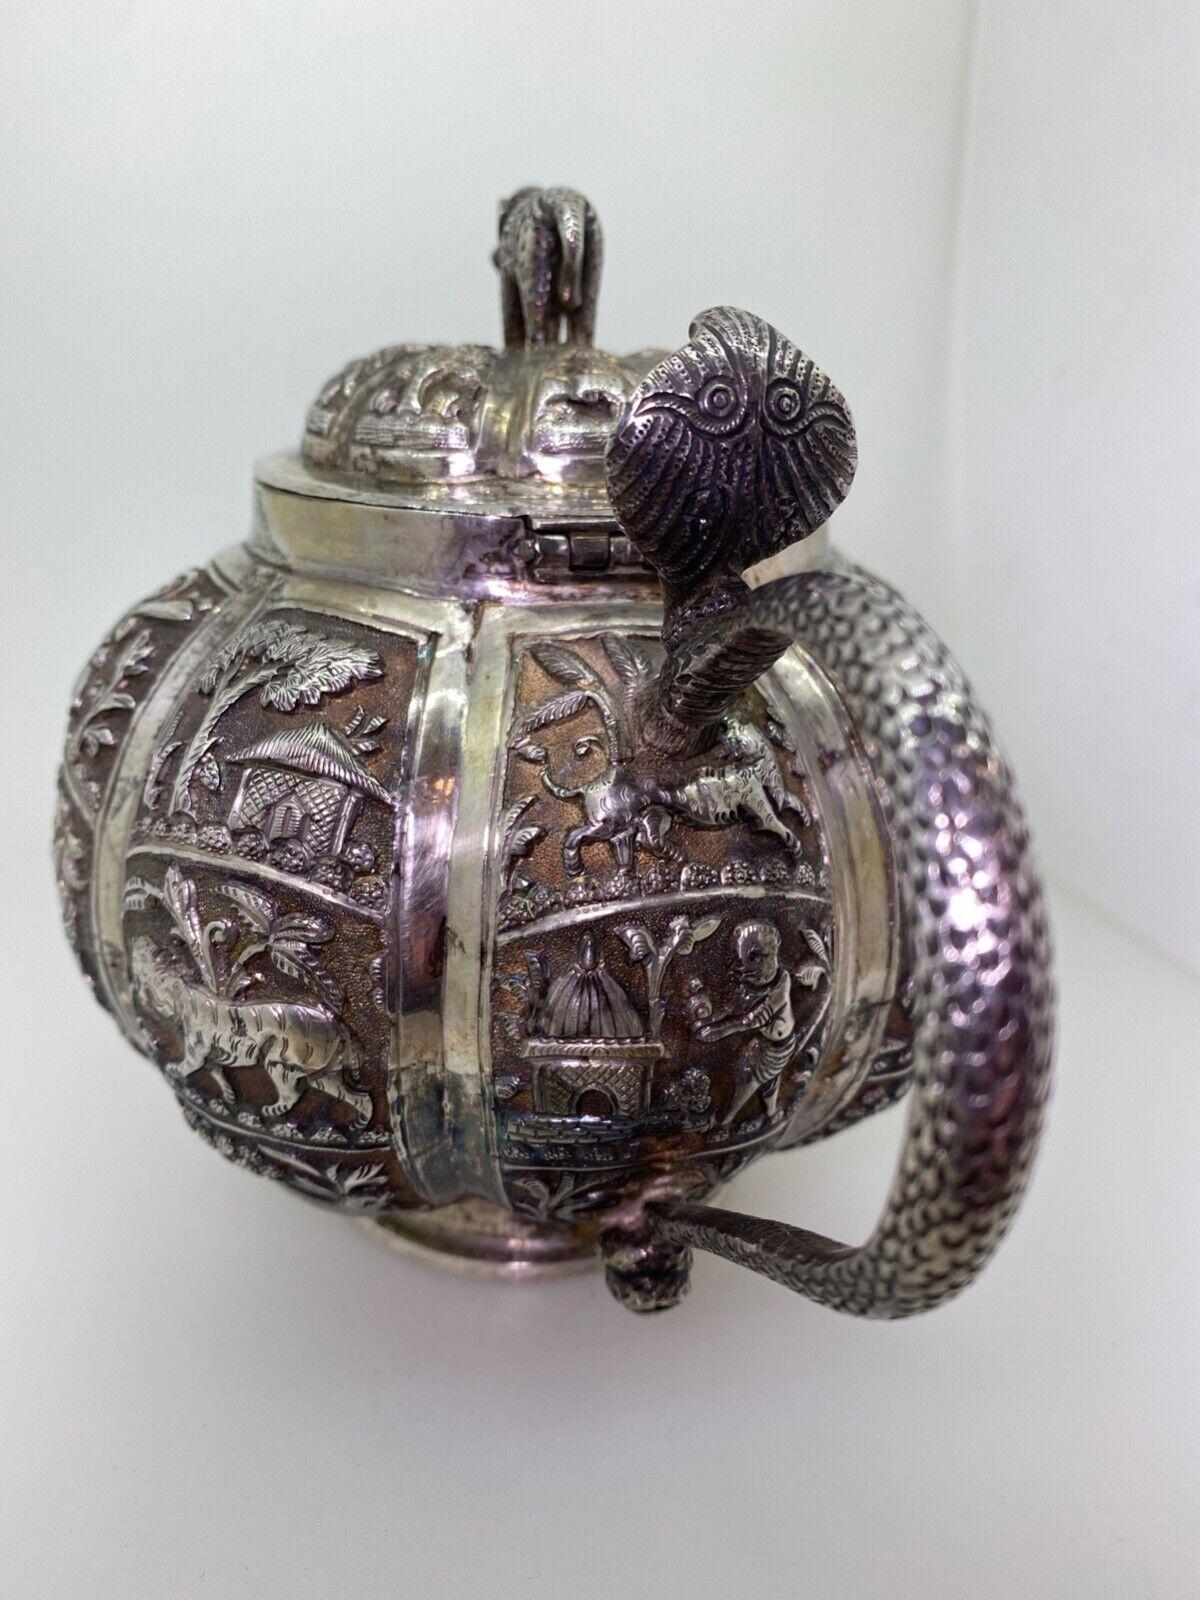 Anglo-Indian Fine & Rare Antique Indian Silver Tea Set, c1890 Calcutta. Total weight: 900gr. For Sale